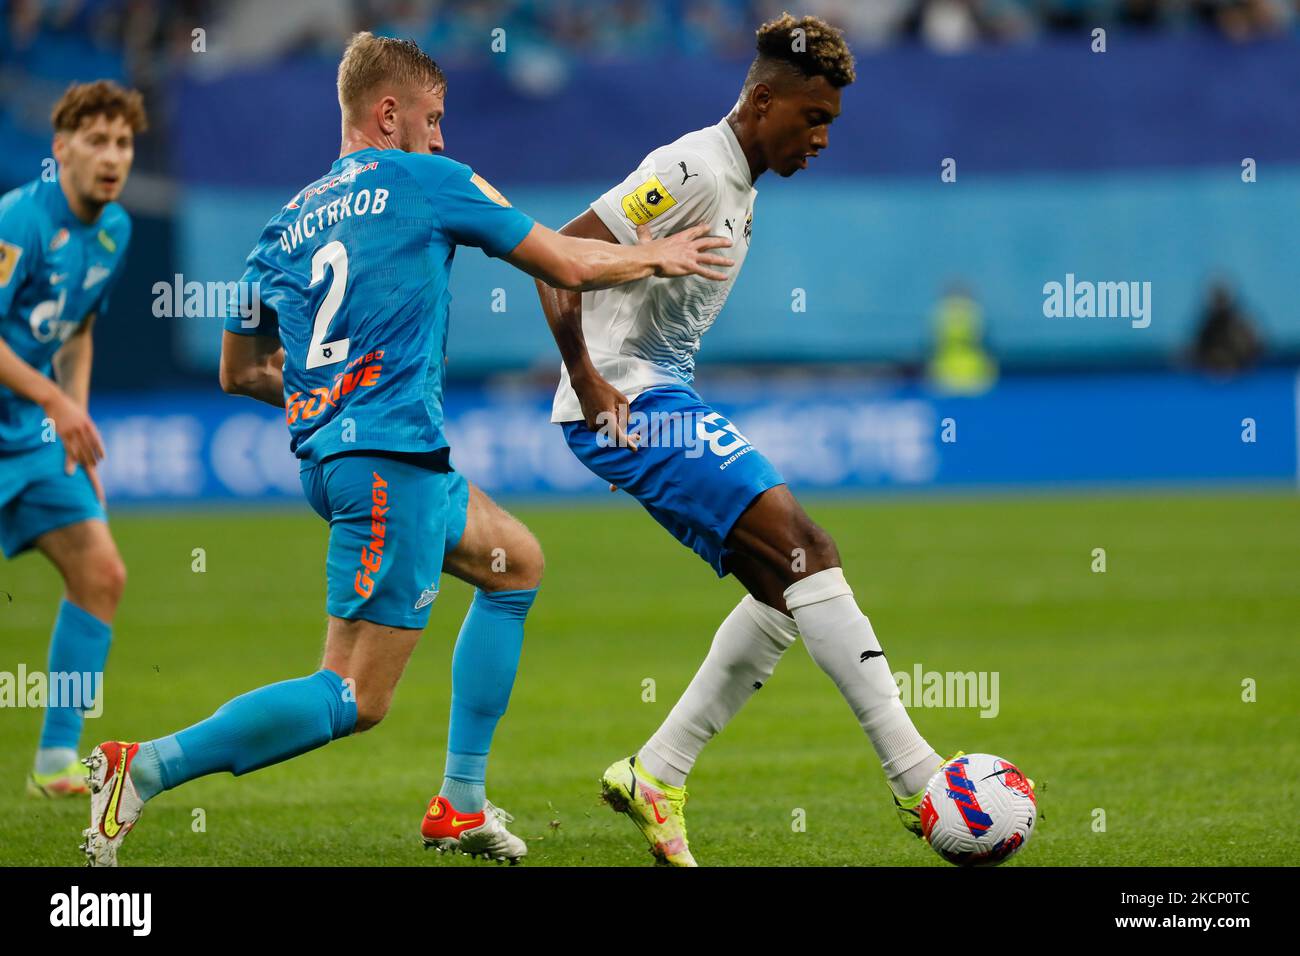 Dmitri Chistyakov (N2) of Zenit and Mateo Cassierra (R) of Sochi vie for the ball during the Russian Premier League match between FC Zenit Saint Petersburg and FC Sochi on October 3, 2021 at Gazprom Arena in Saint Petersburg, Russia. (Photo by Mike Kireev/NurPhoto) Stock Photo